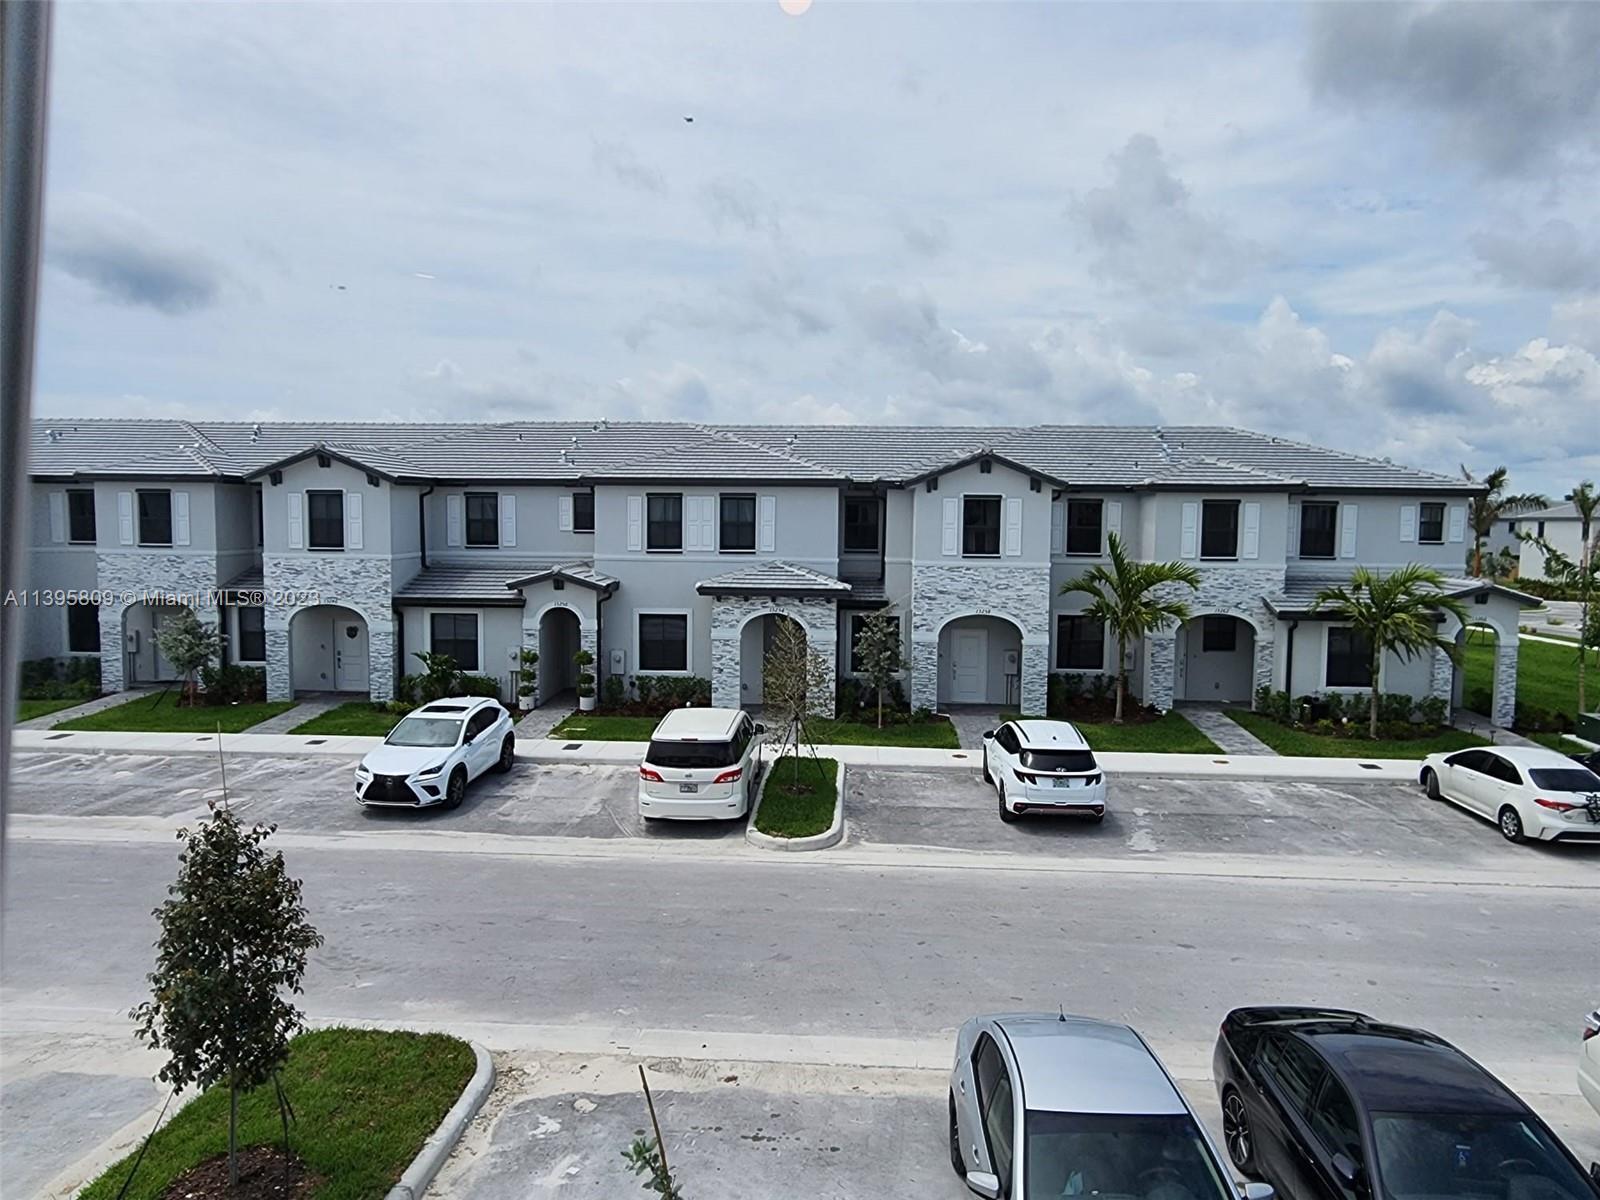 Gorgeous Townhouse modern in Homestead 3 bedrooms, 2-1/2 bathrooms. Stainless steel appliances. * Please submit offer via email with CTL, Police Report, Credit Report, last 3 bank statements, last 3 paystubs, and Photo ID. * Move in cost= 1st month + 2 month security deposit.